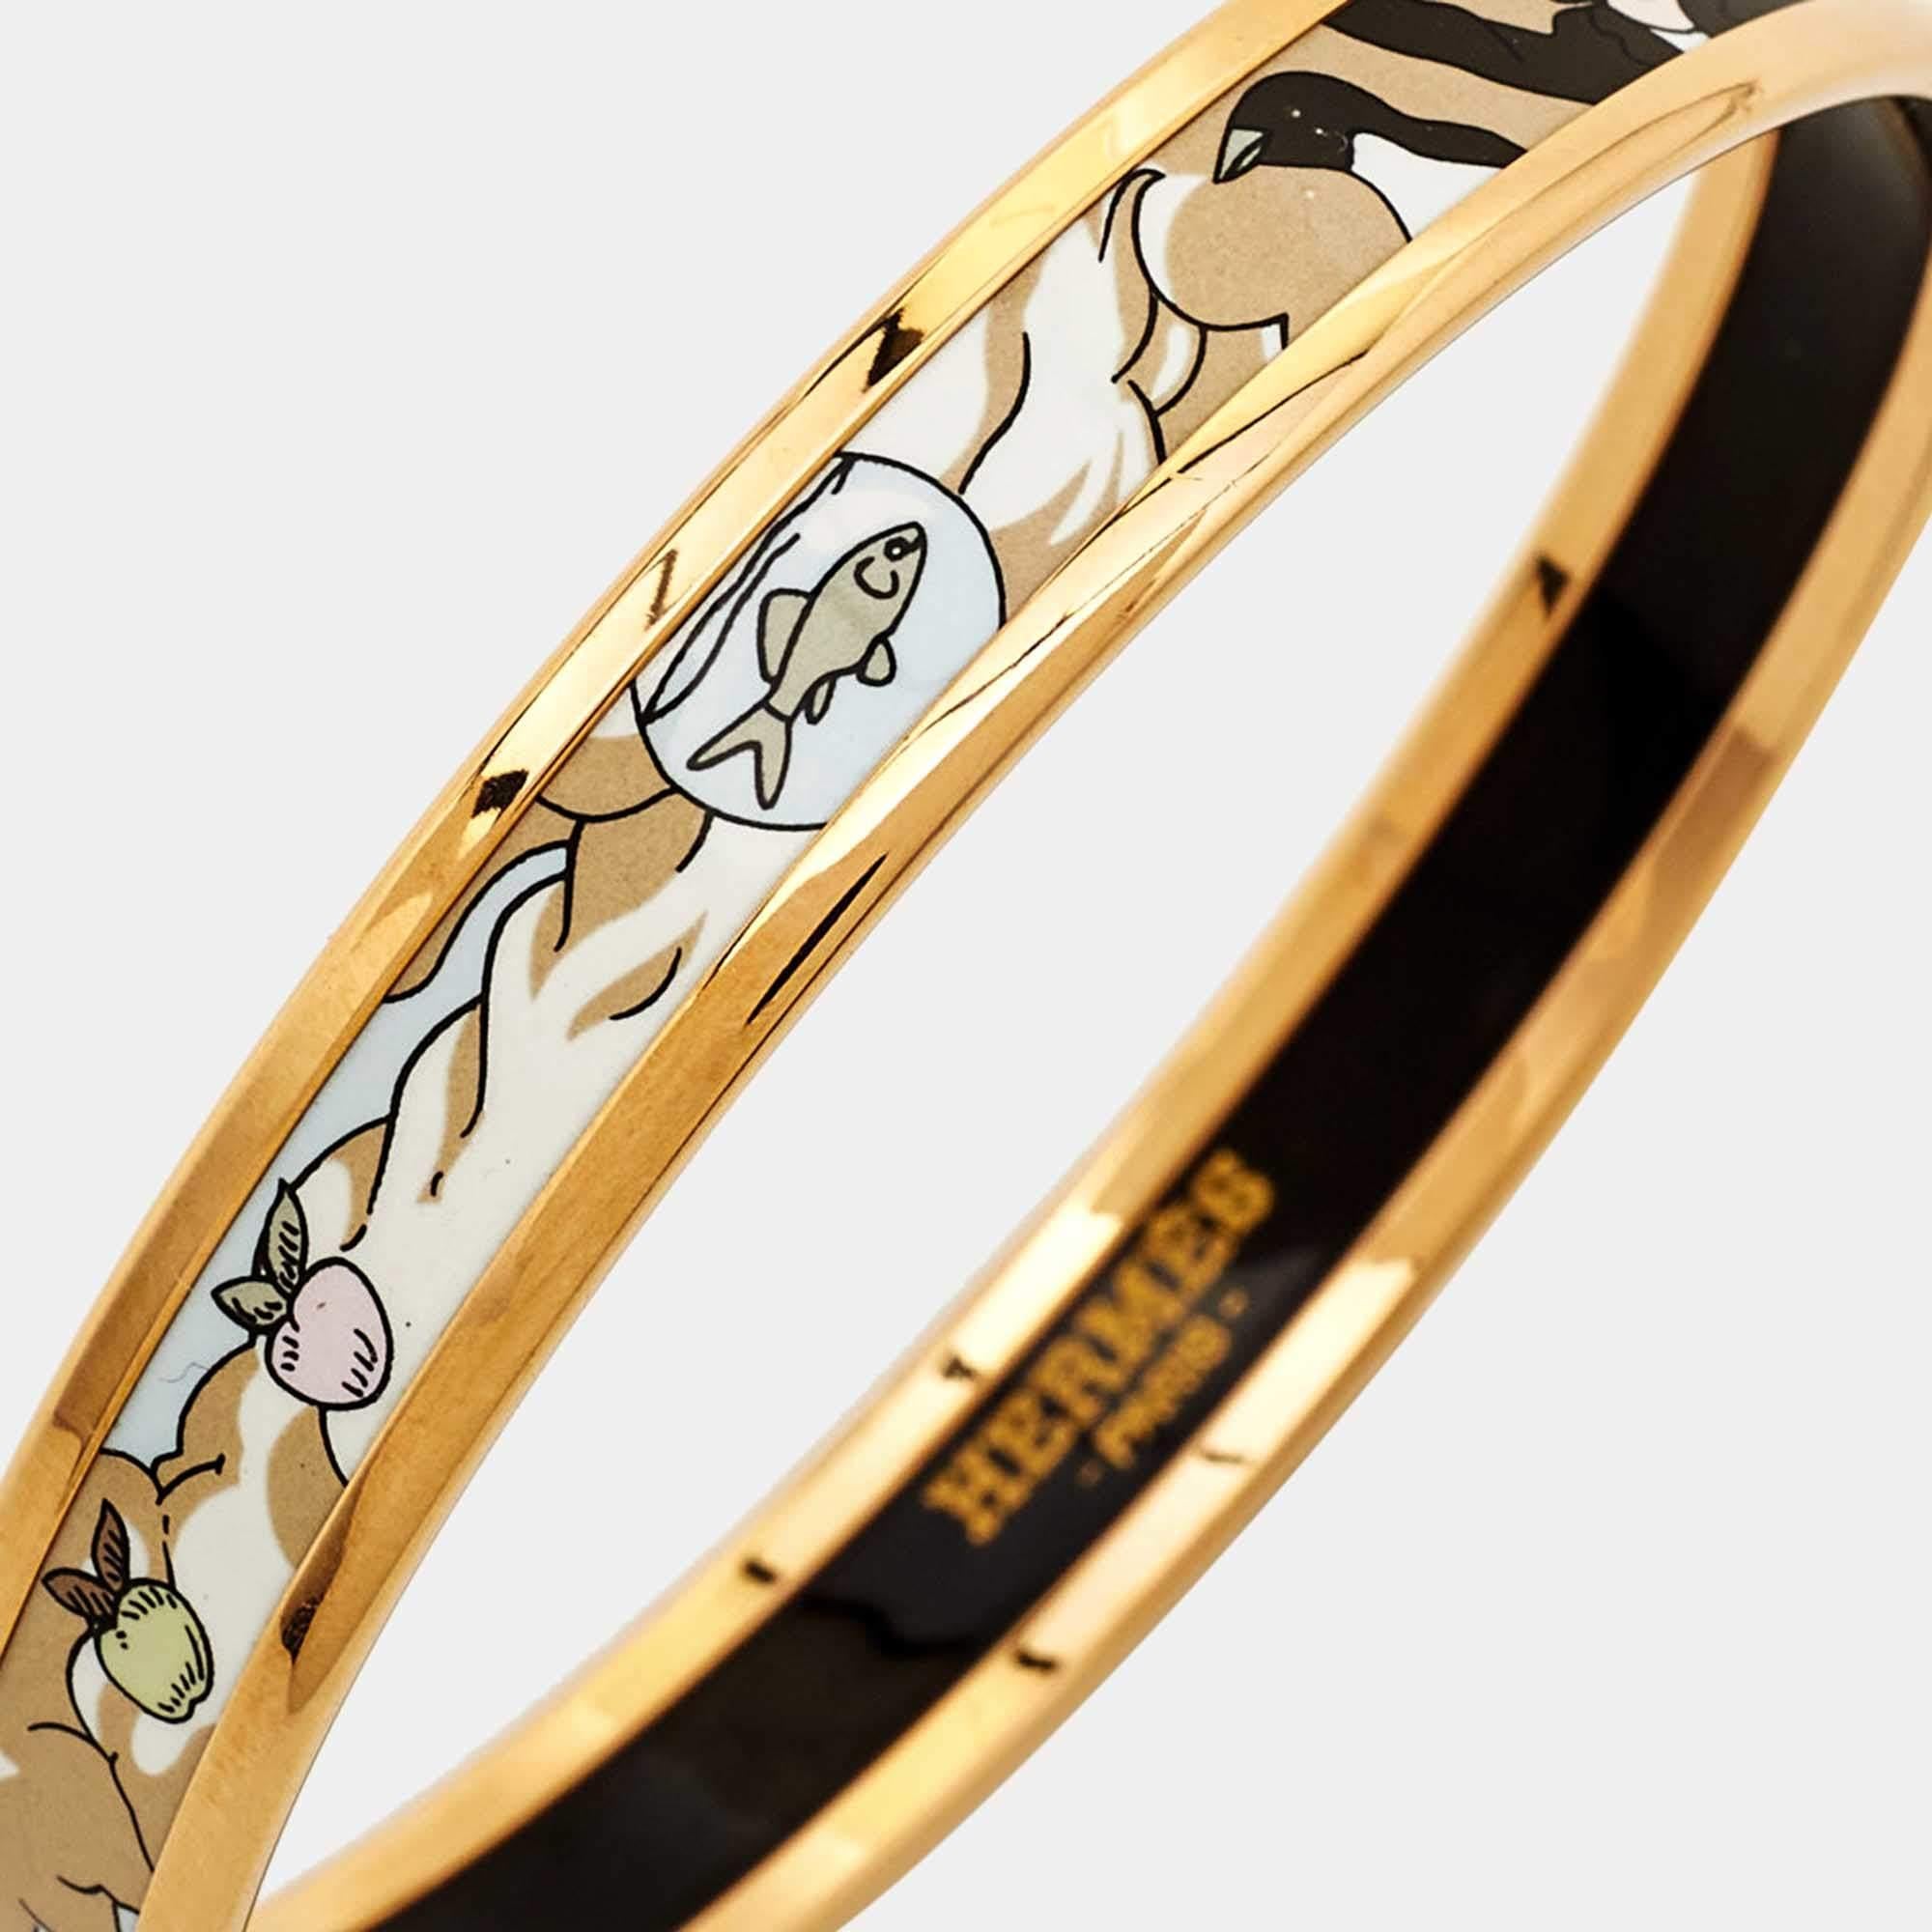 Hermès brings this fabulous bracelet rendered in an elegant bangle silhouette for the woman who is ready to ace every accessory game. It is sure to catch an eye and make your heart skip a beat. Flaunt it with your all looks, from formal to